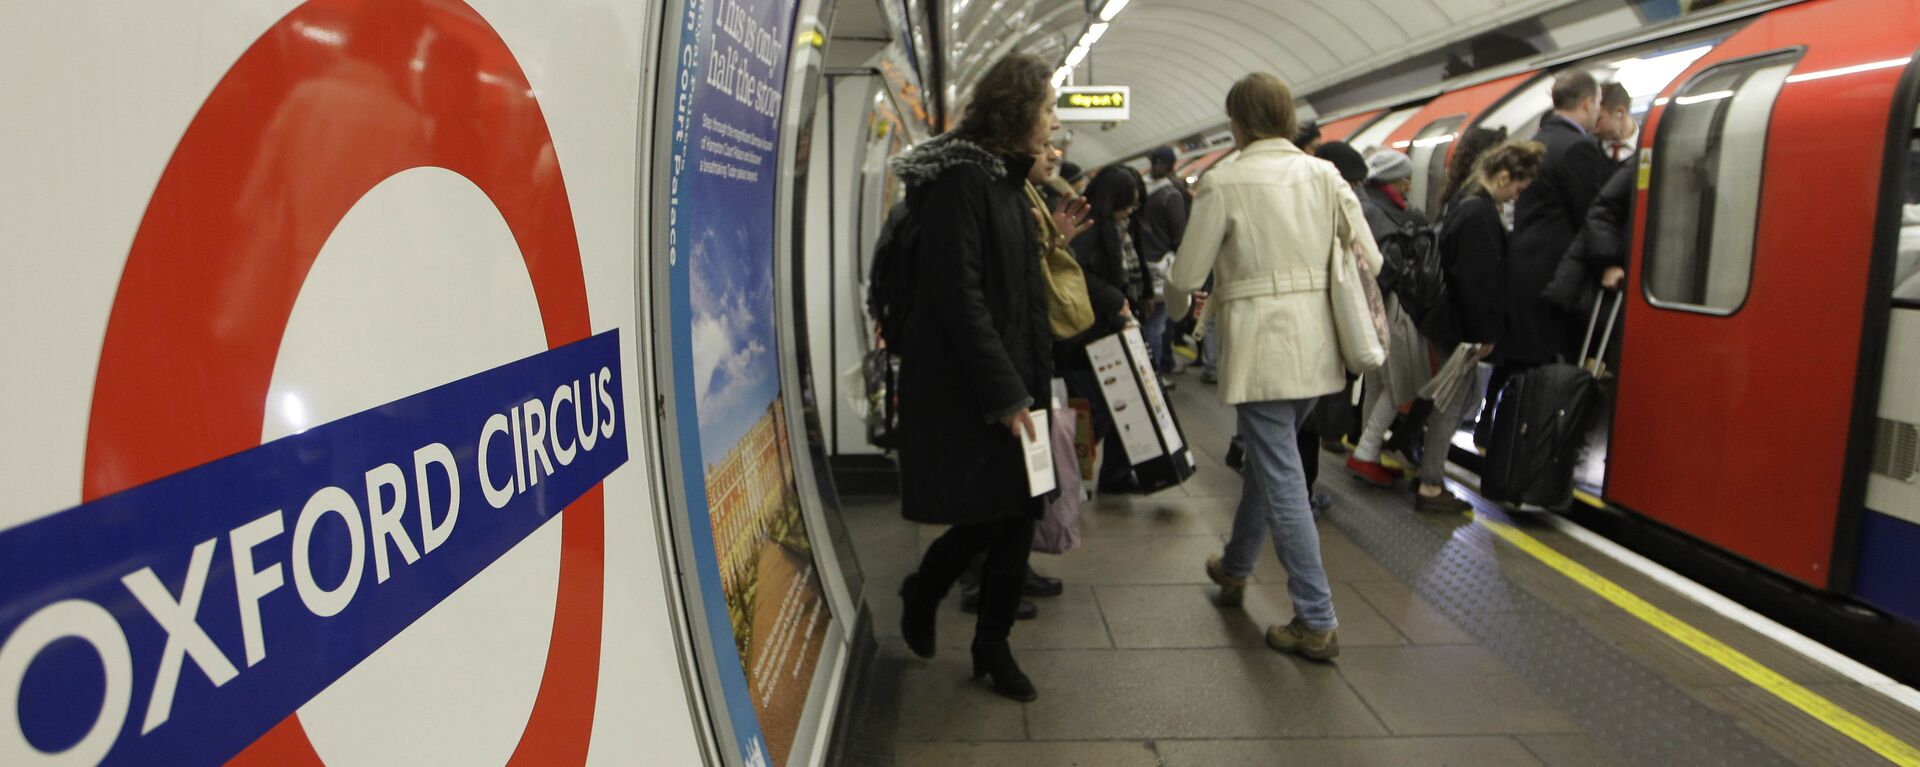 People board an underground Tube train at Oxford Circus underground station in London. (File) - Sputnik International, 1920, 13.03.2018